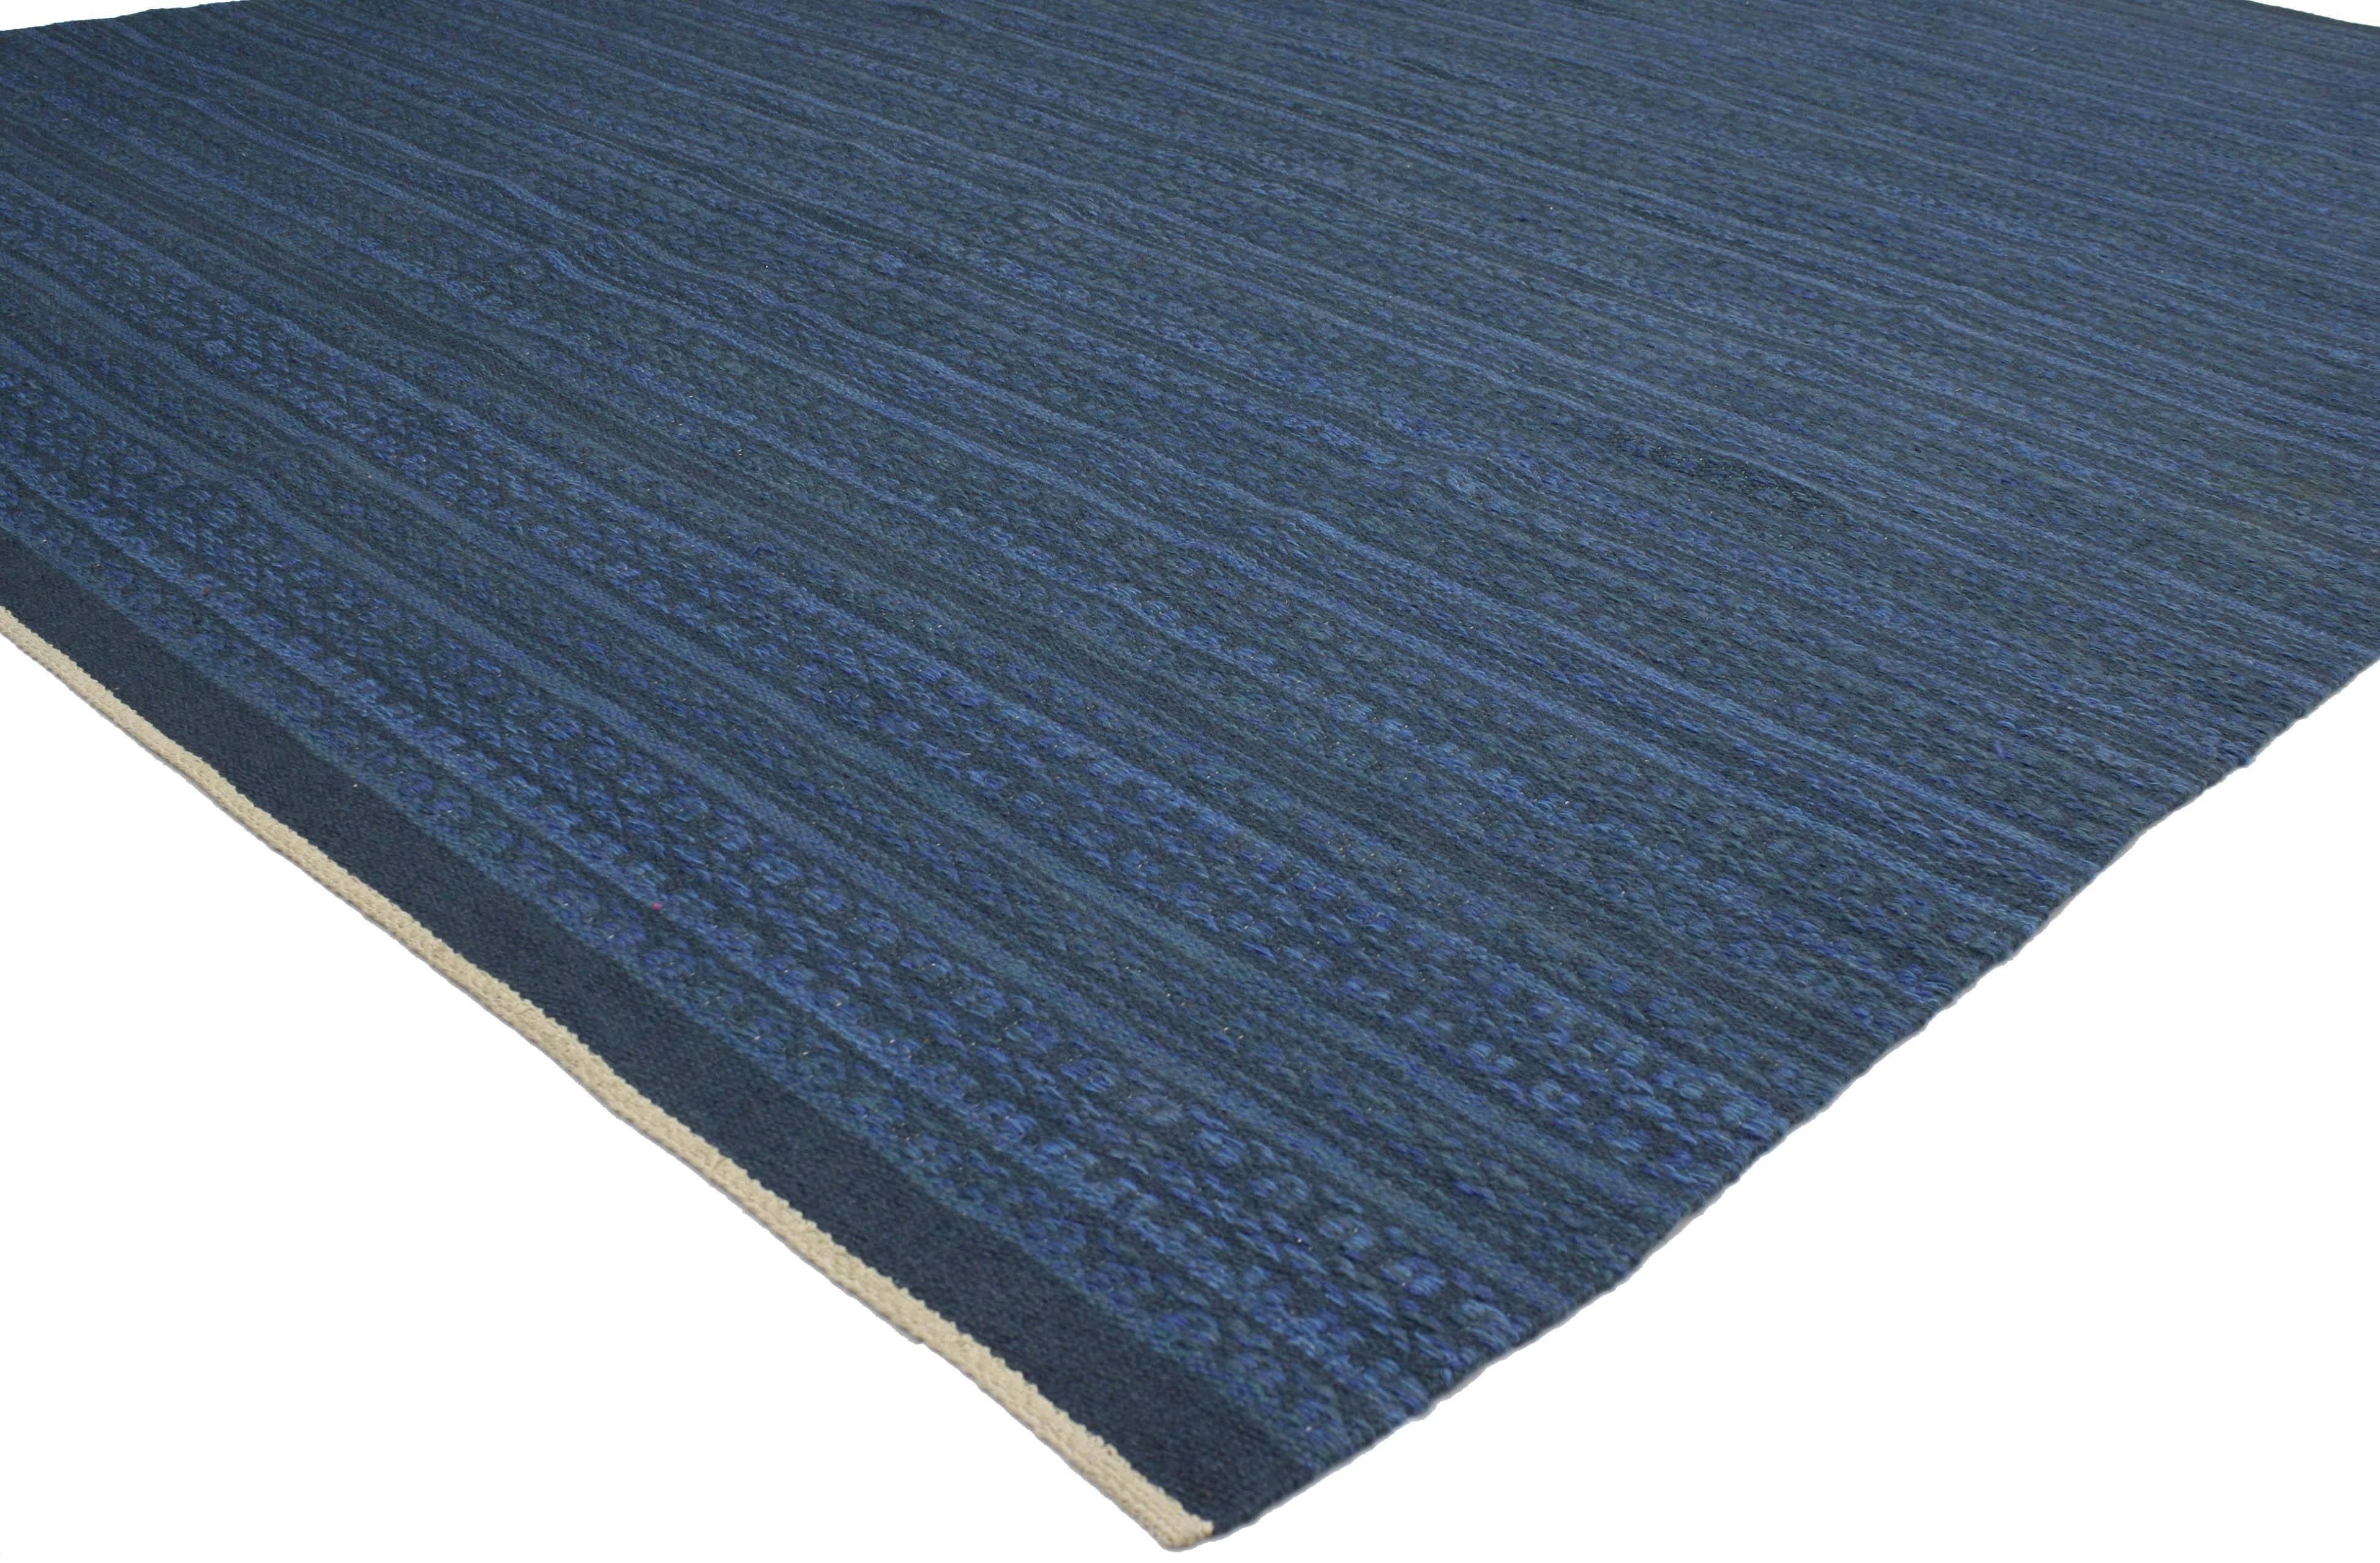 Featuring a traditional modern design highlighting some of the finest midcentury Swedish rugs, this appealing example is influenced by its subtle beauty that is enhanced by its fresh blue color. This vintage Swedish Rollakan Kilim was designed by a